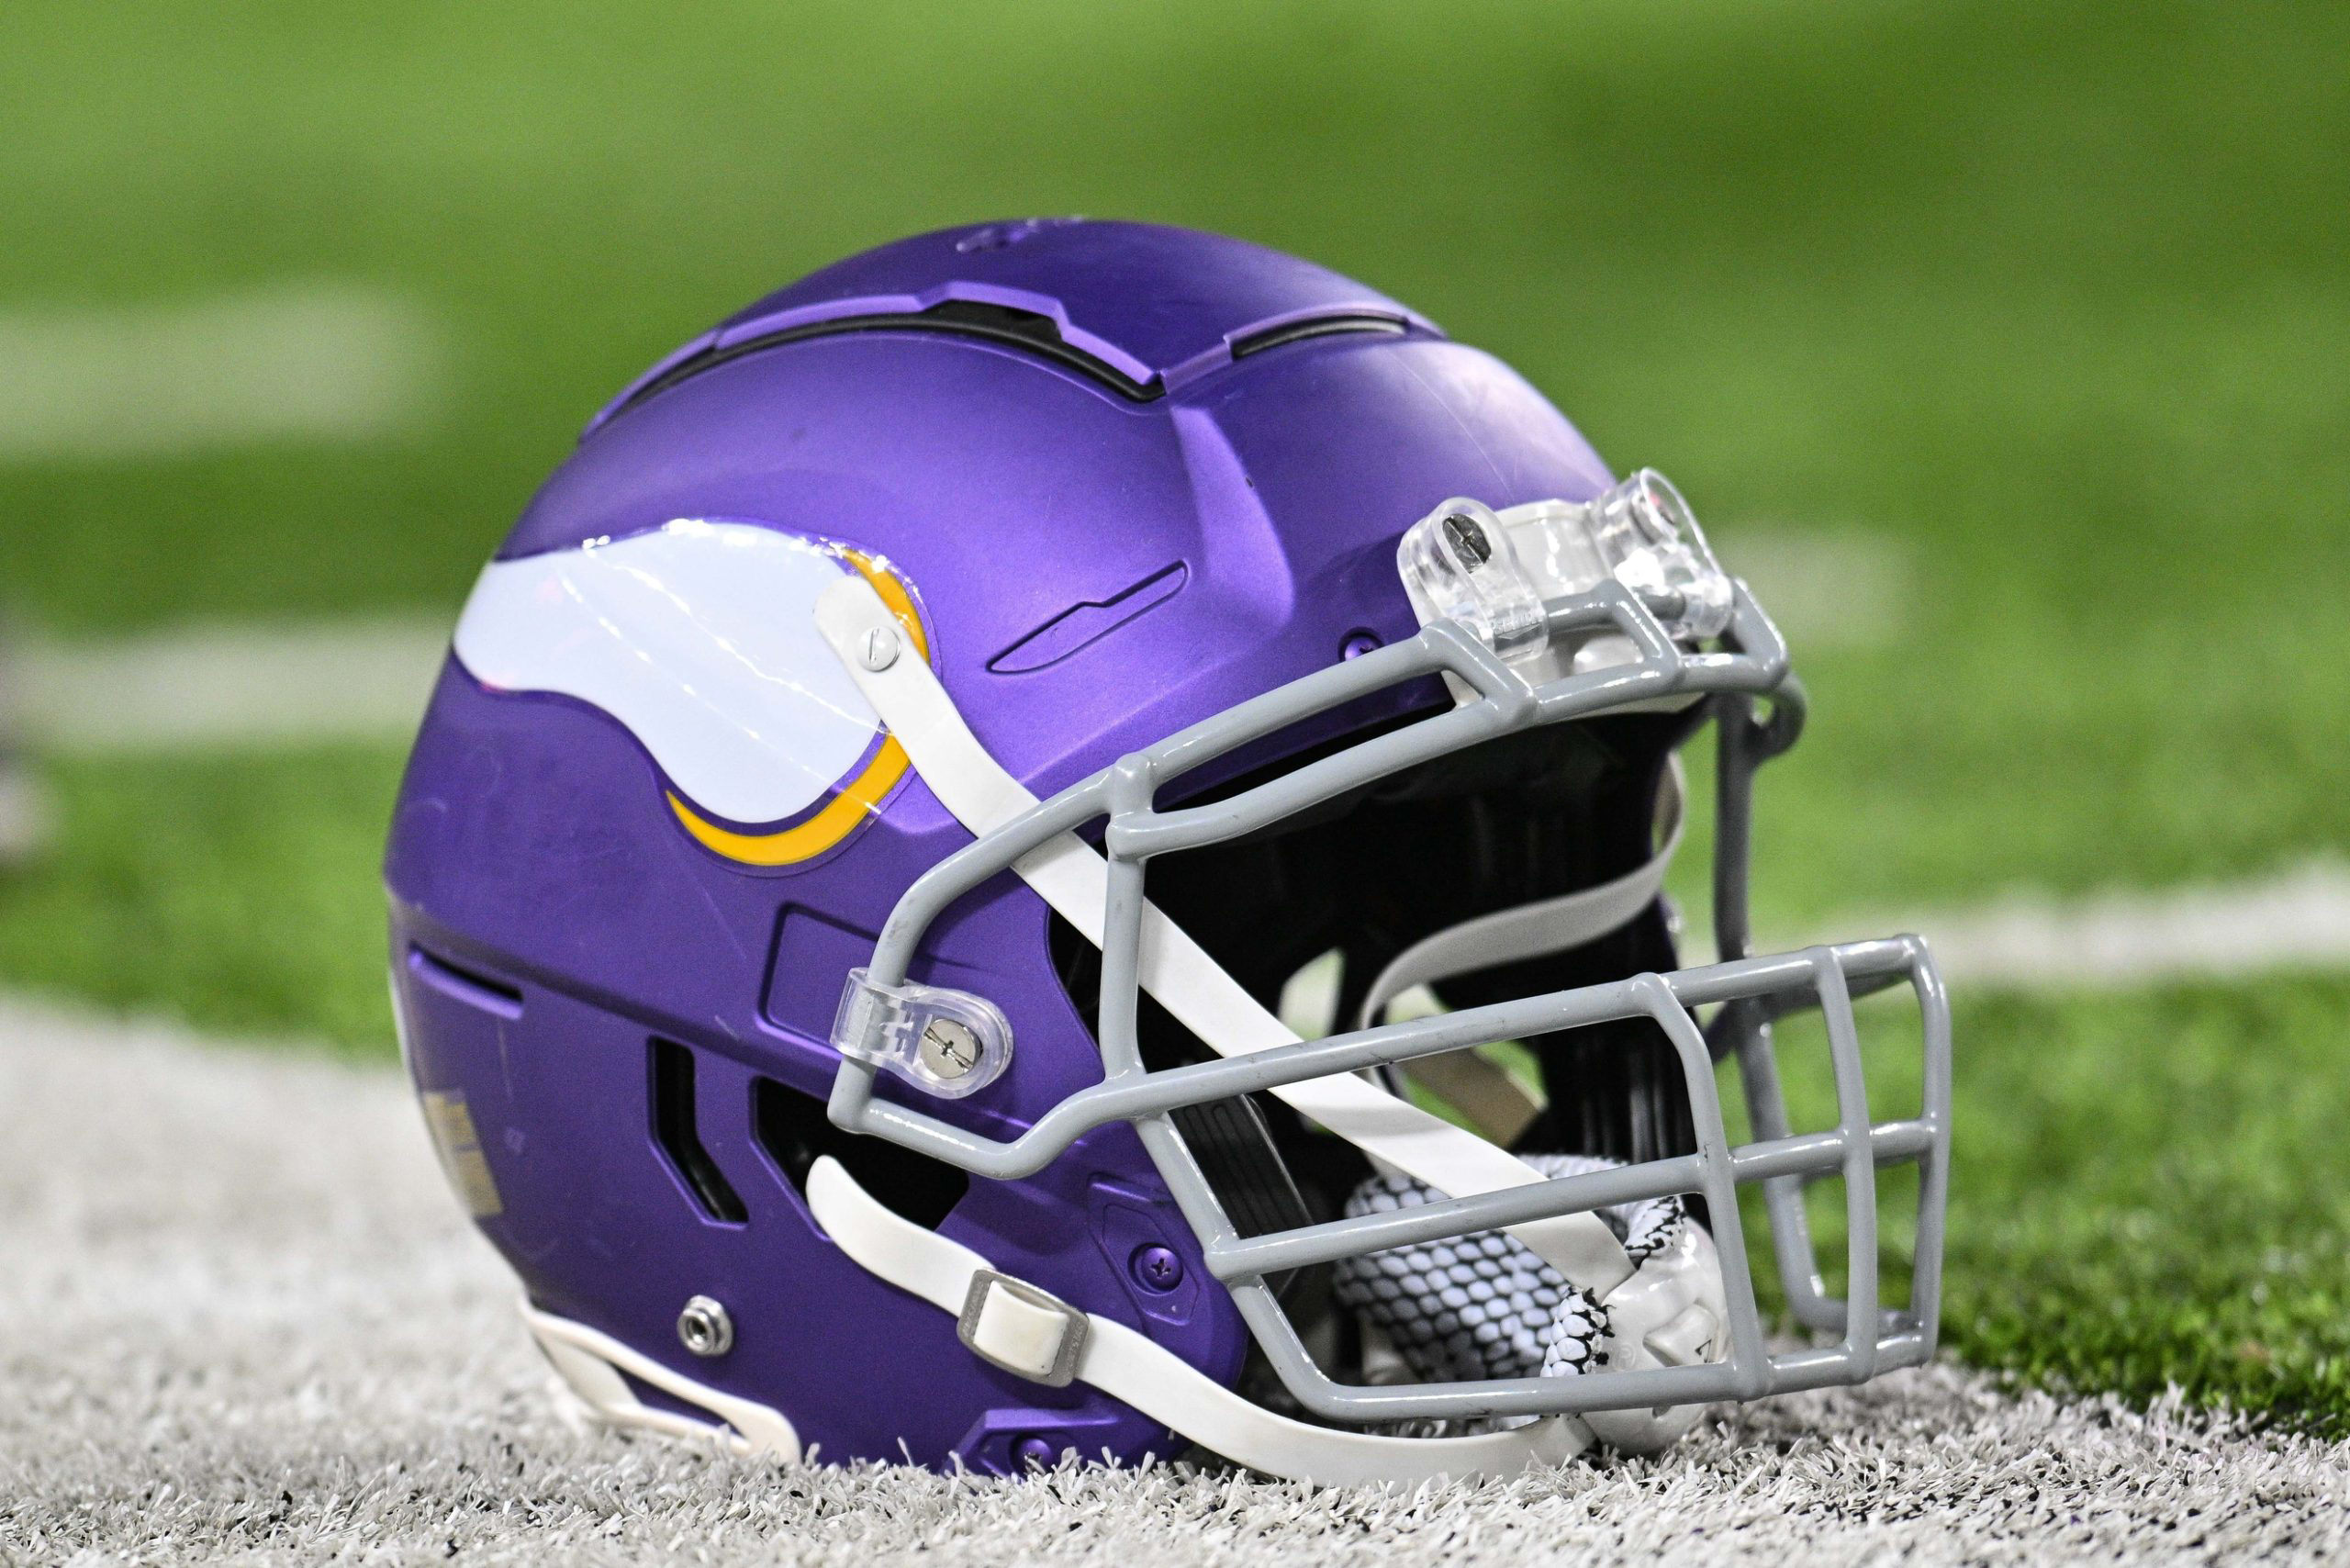 Vikings coach reacts to signing new quarterback